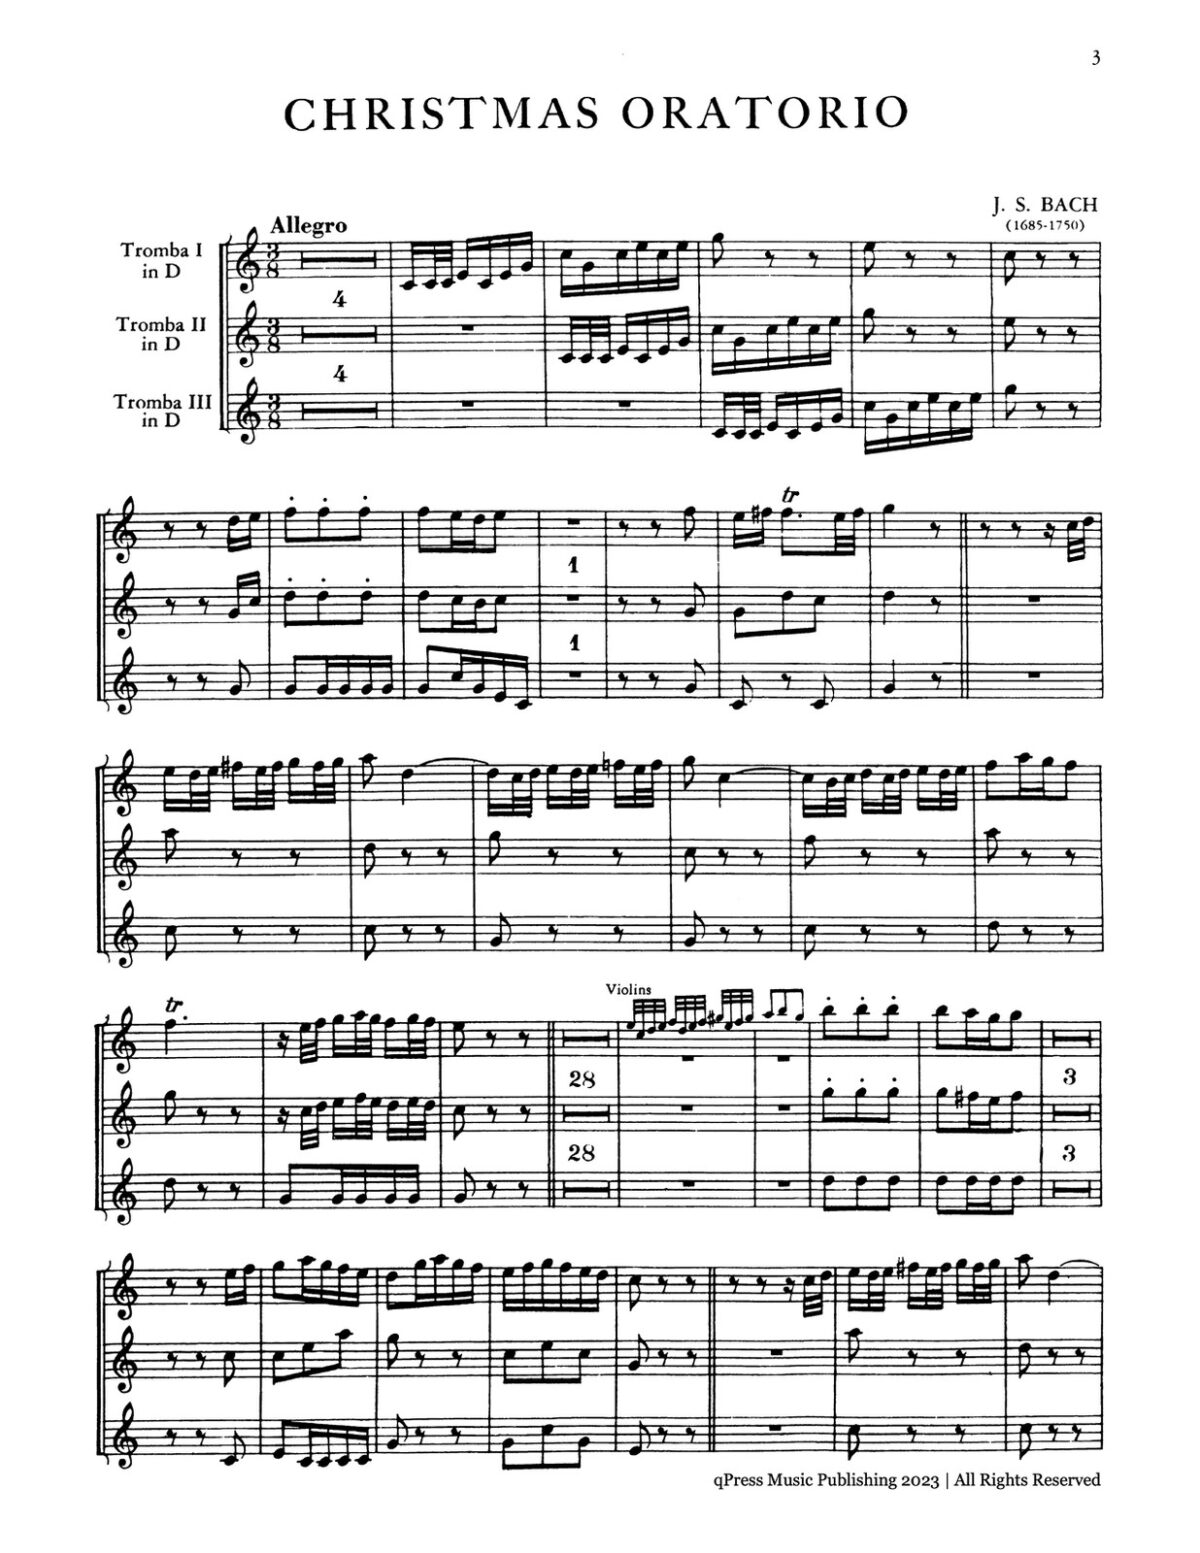 Orchestral Excerpts from the Symphonic Repertoire Vols.1-10 by